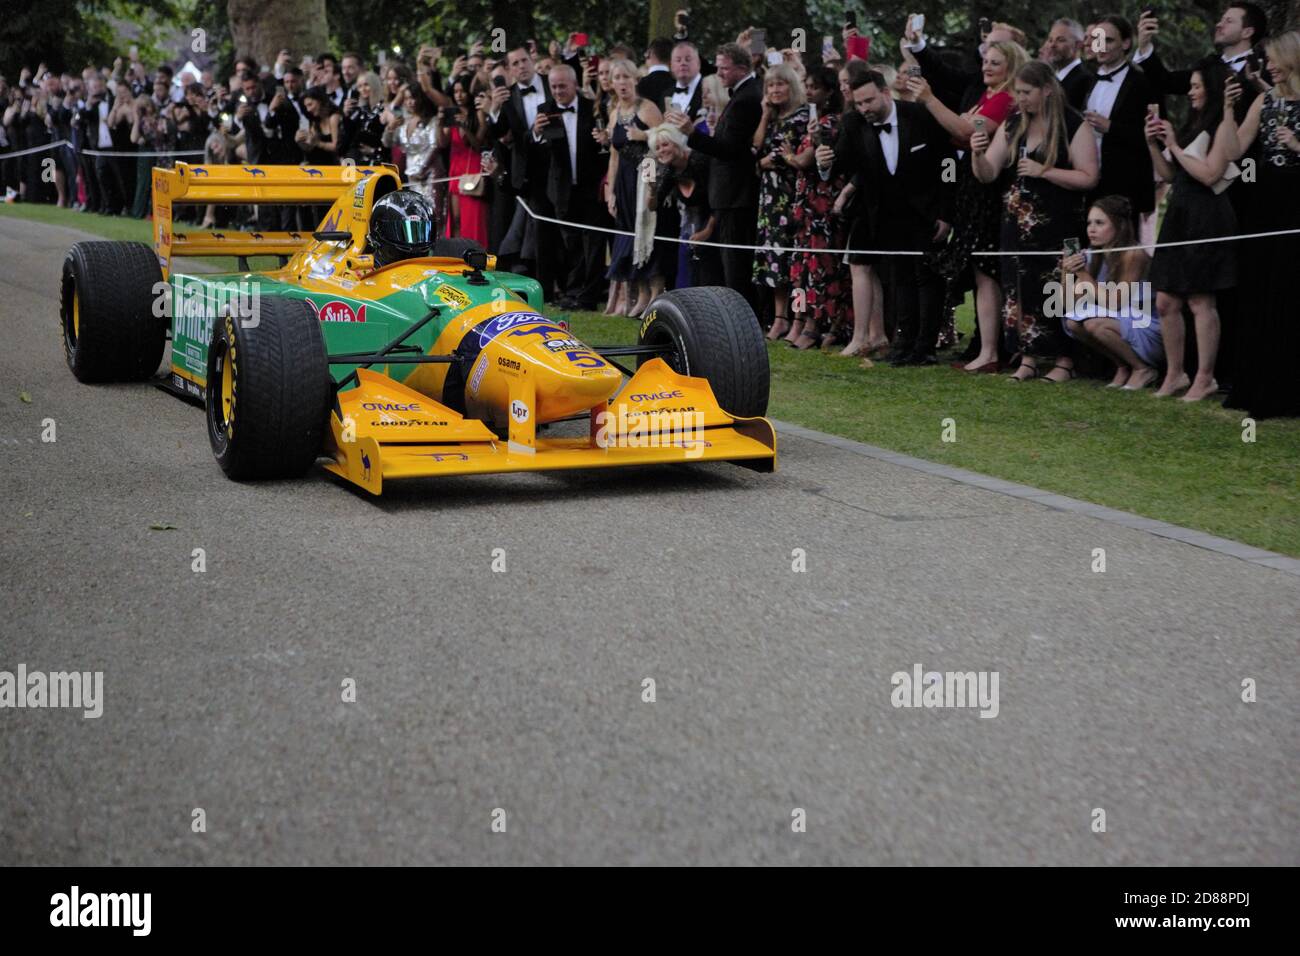 The 1992 Michael Schumacher Benetton B192 seen during the Live show performance at the 2019 Grand Prix Ball. Stock Photo